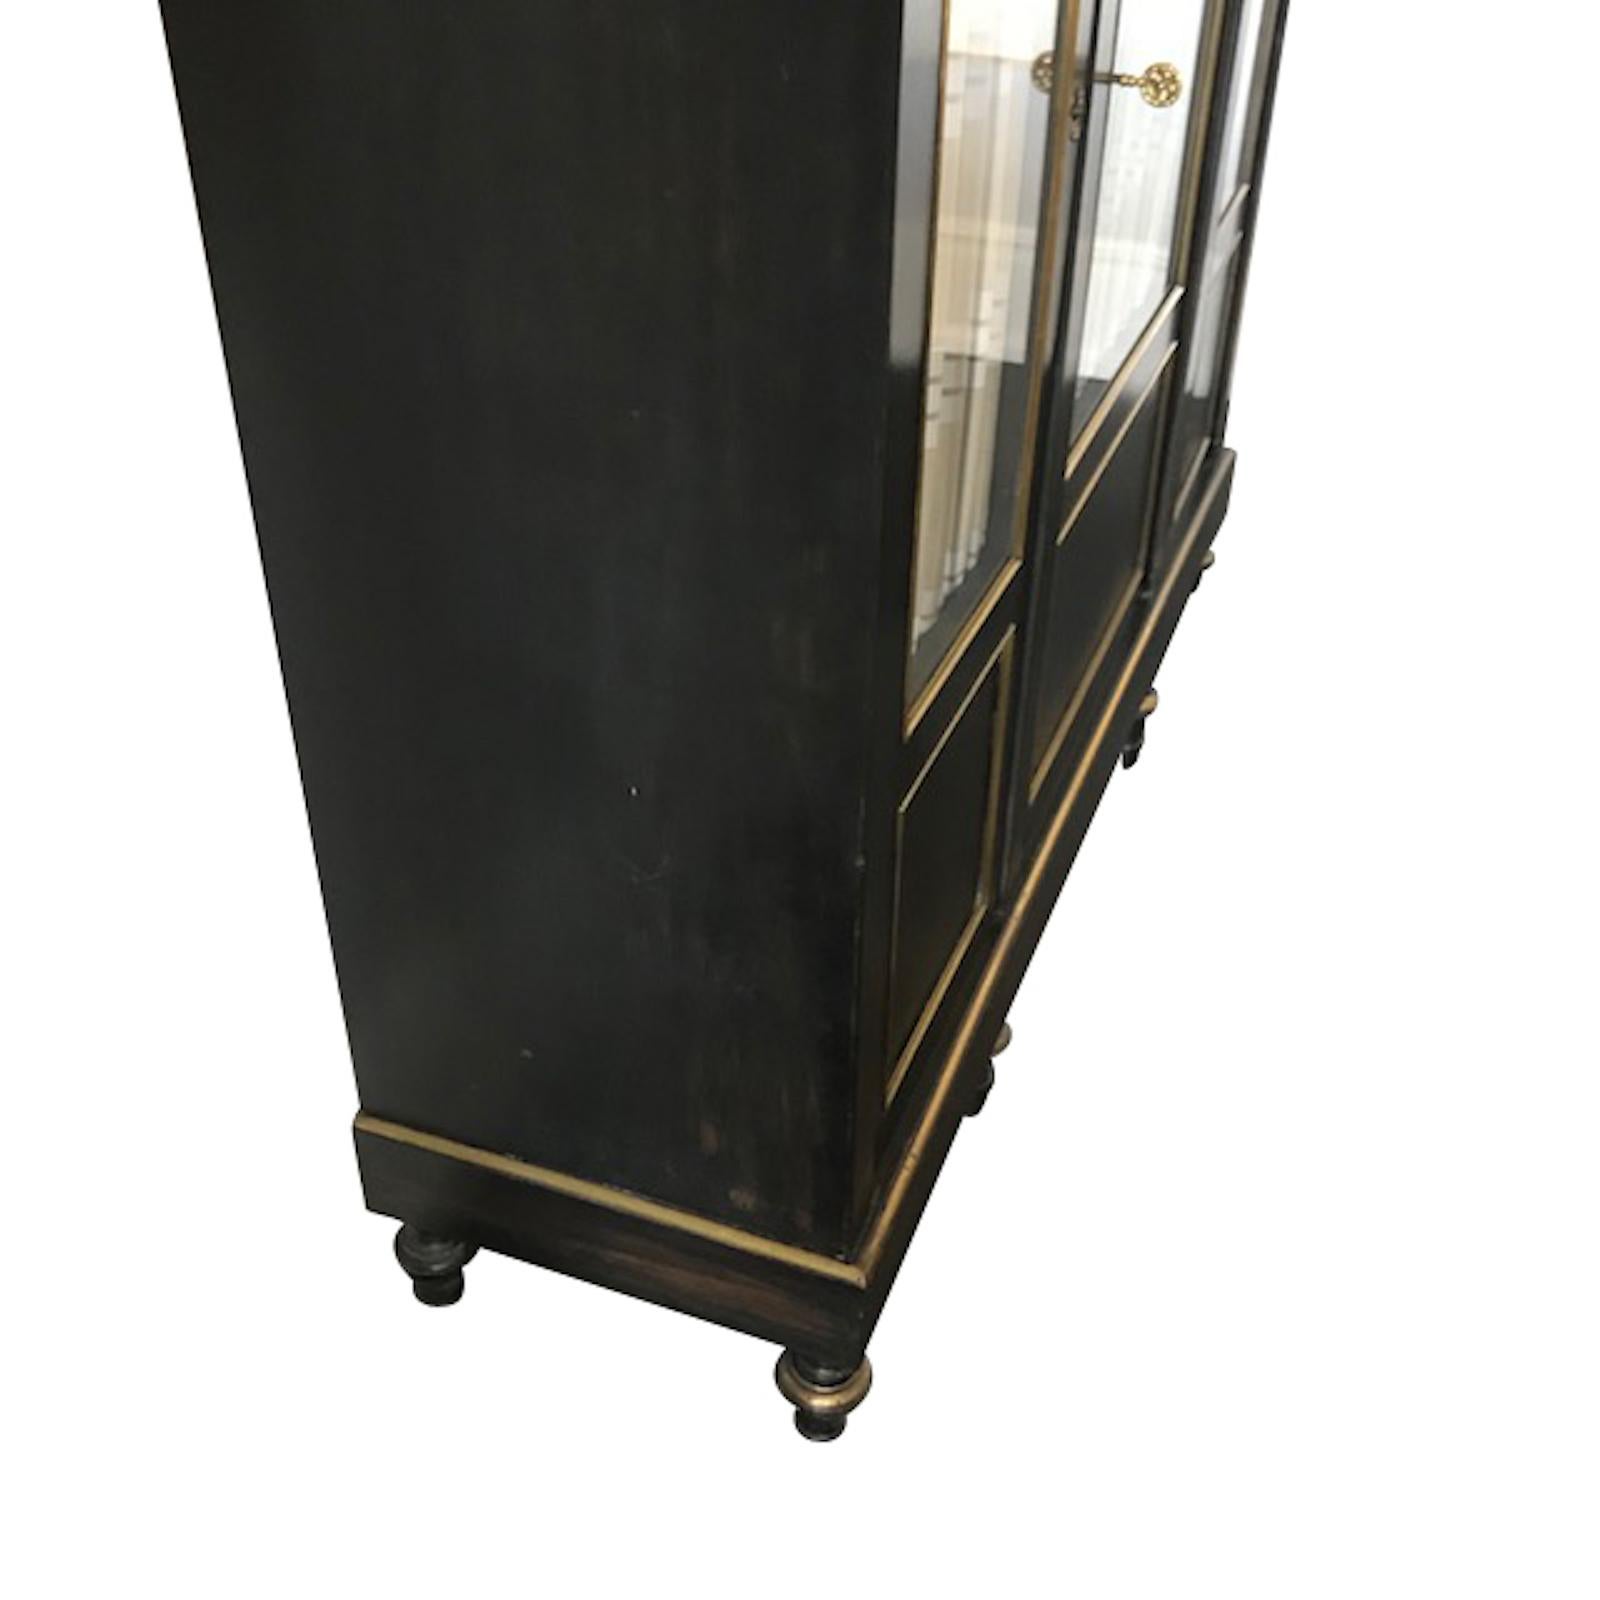 19th century French Napoleon III ebonized black cabinet with decorative brass details.
Original glass front panel doors.
Three interior wooden shelves.
Two are available and sold individually.